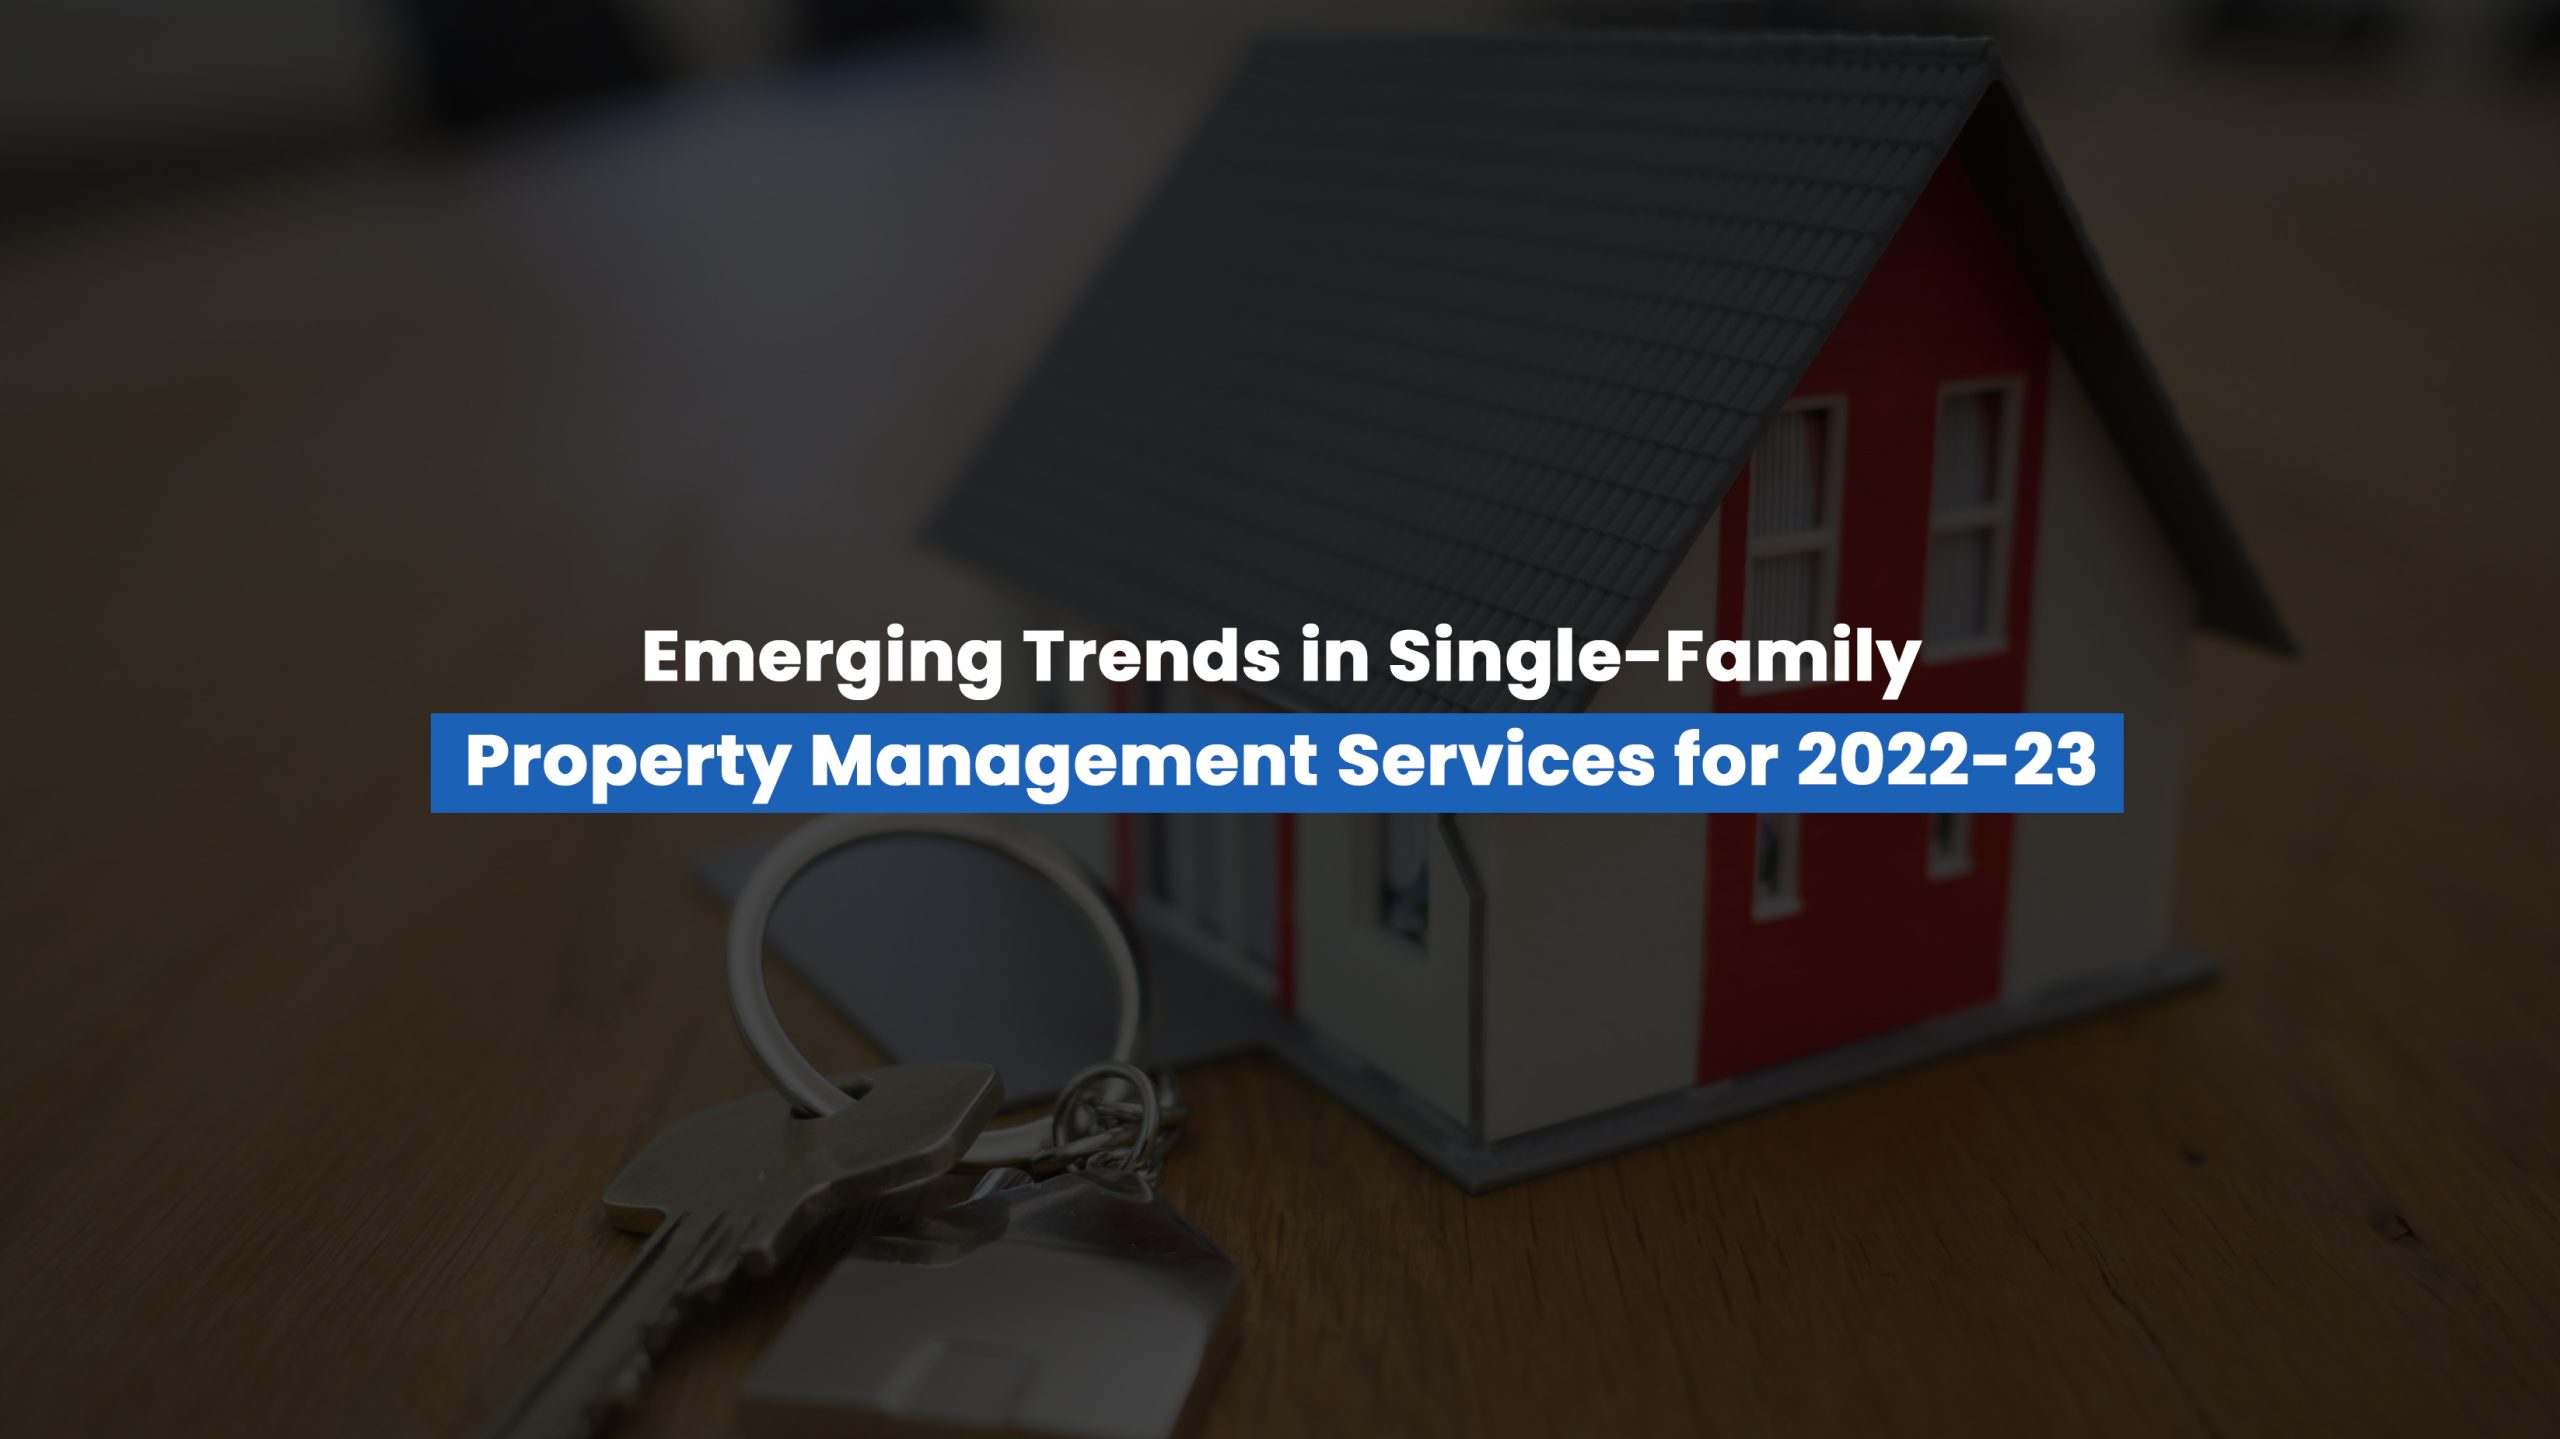 Emerging Trends in Single-Family Property Management Services for 2022-23